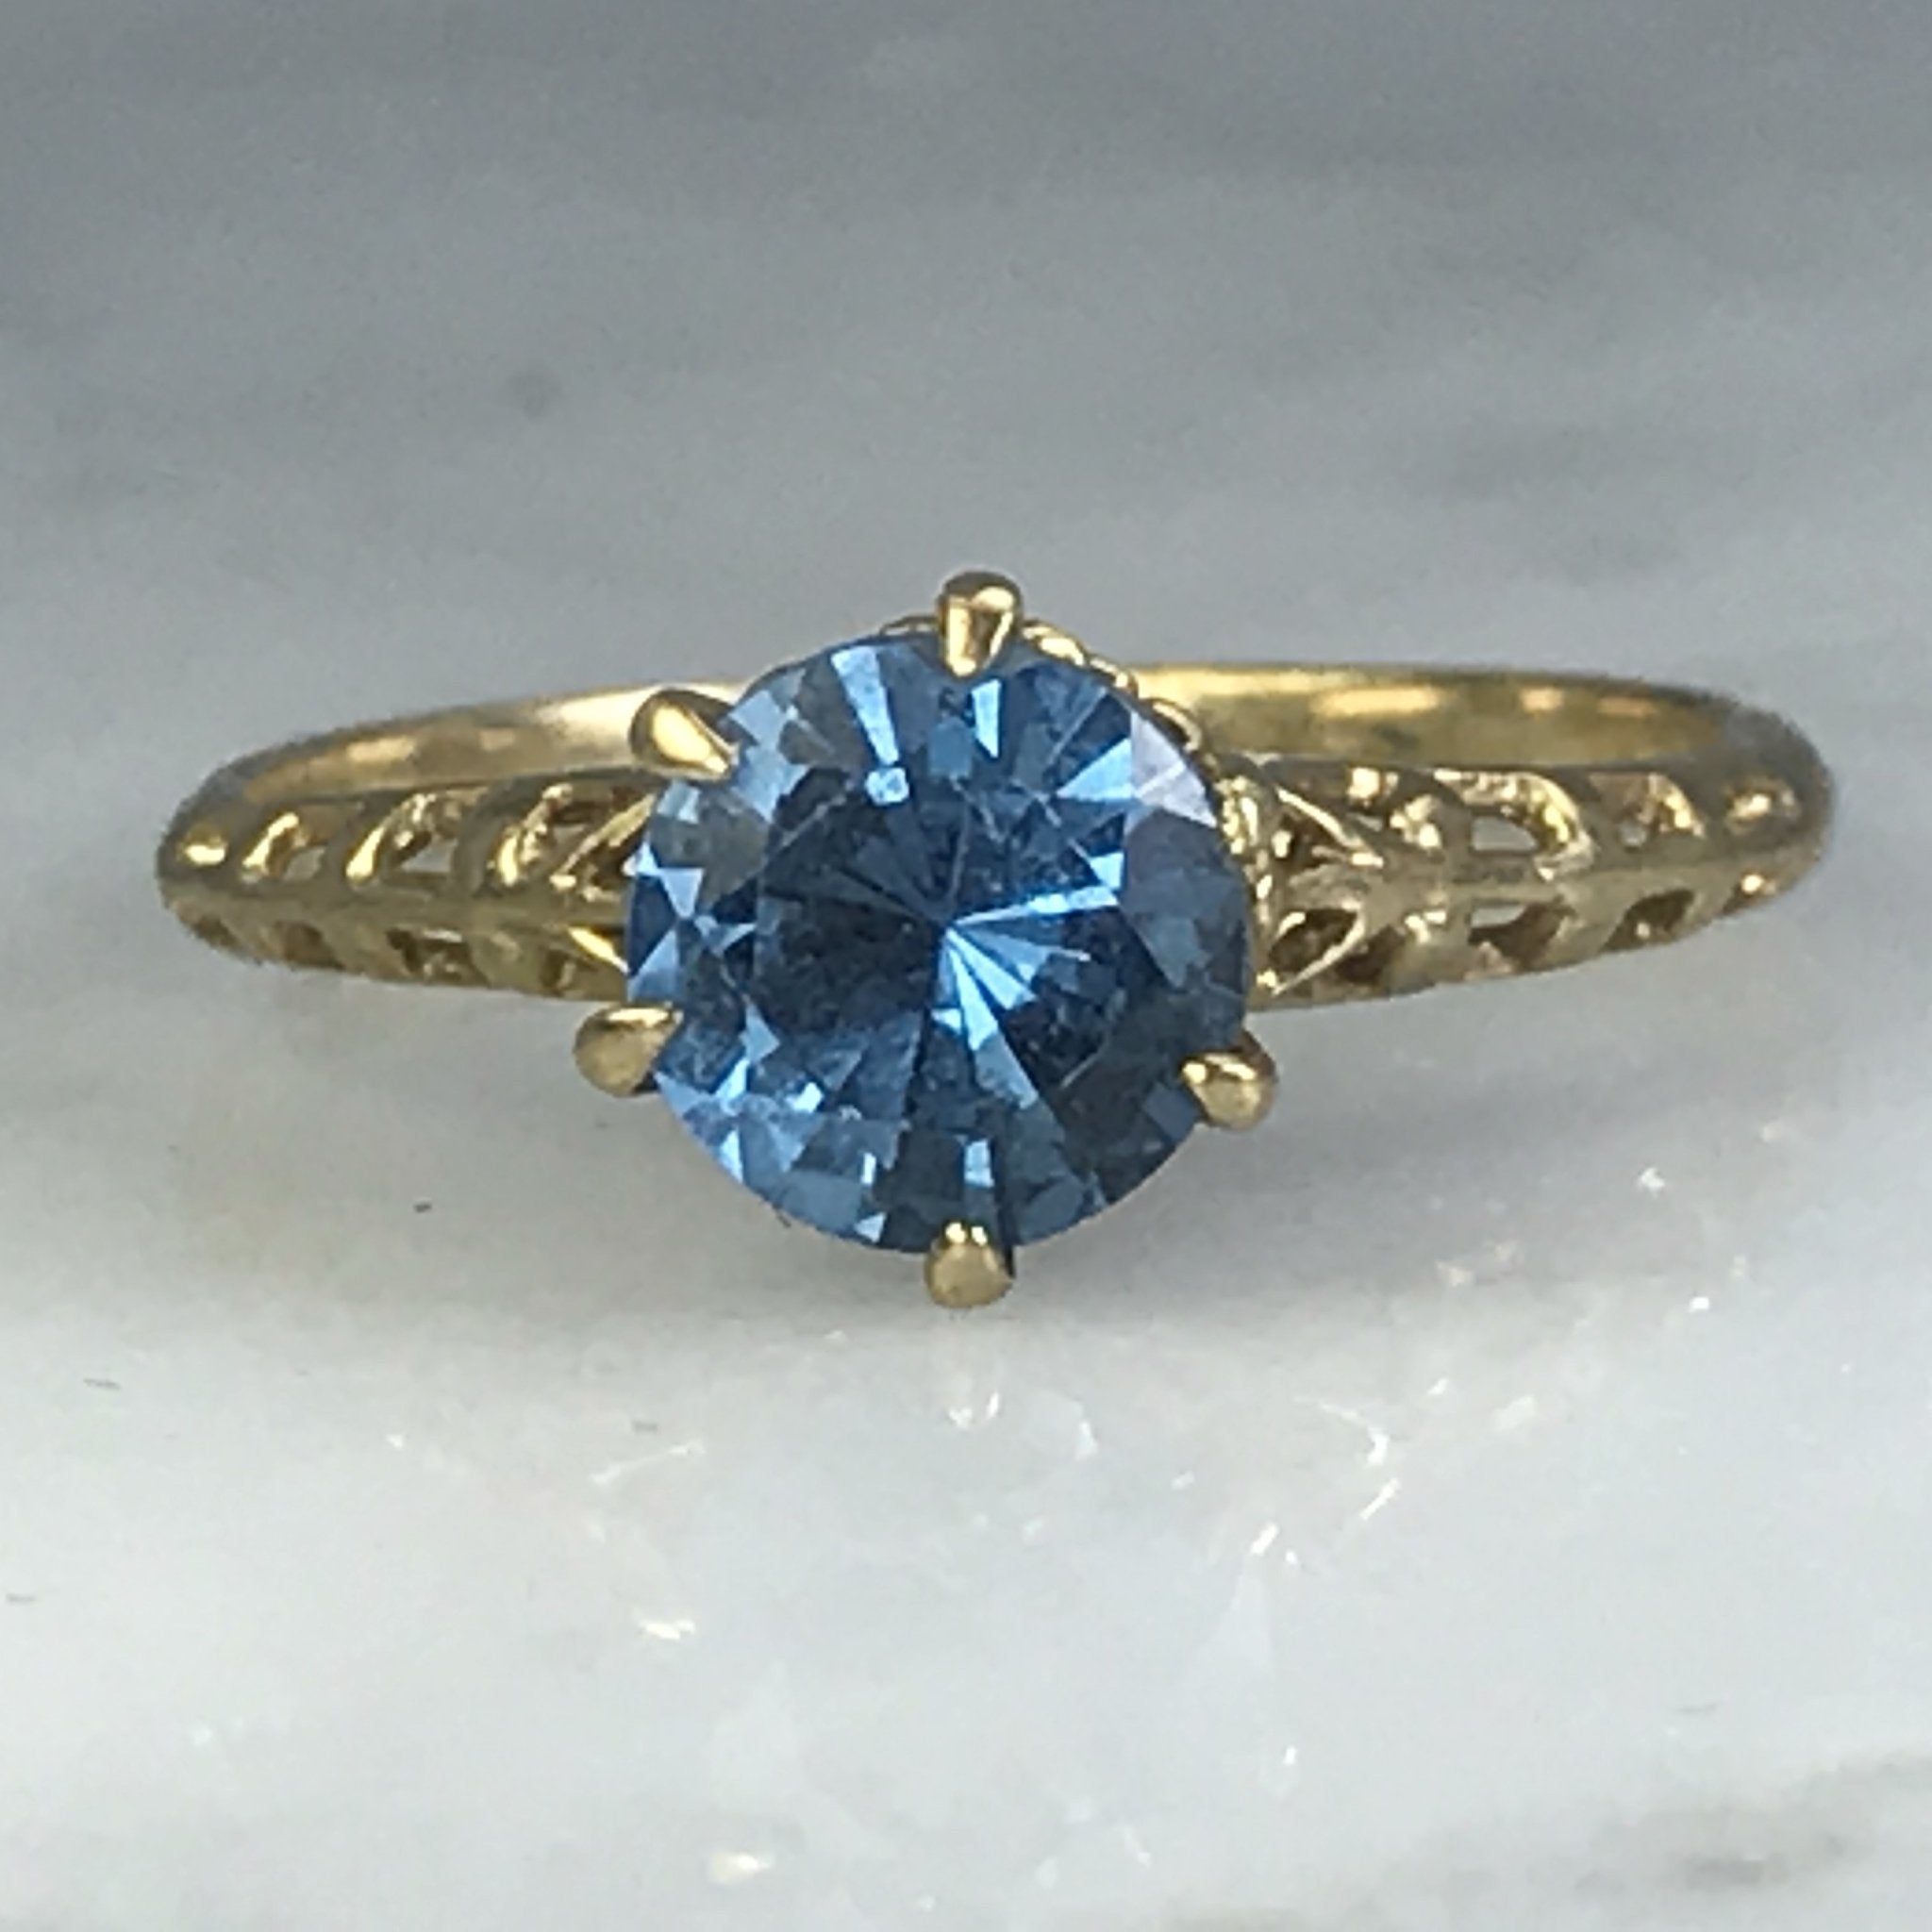 Natural Aquamarine March Birthstone Ring in 14k Solid Gold